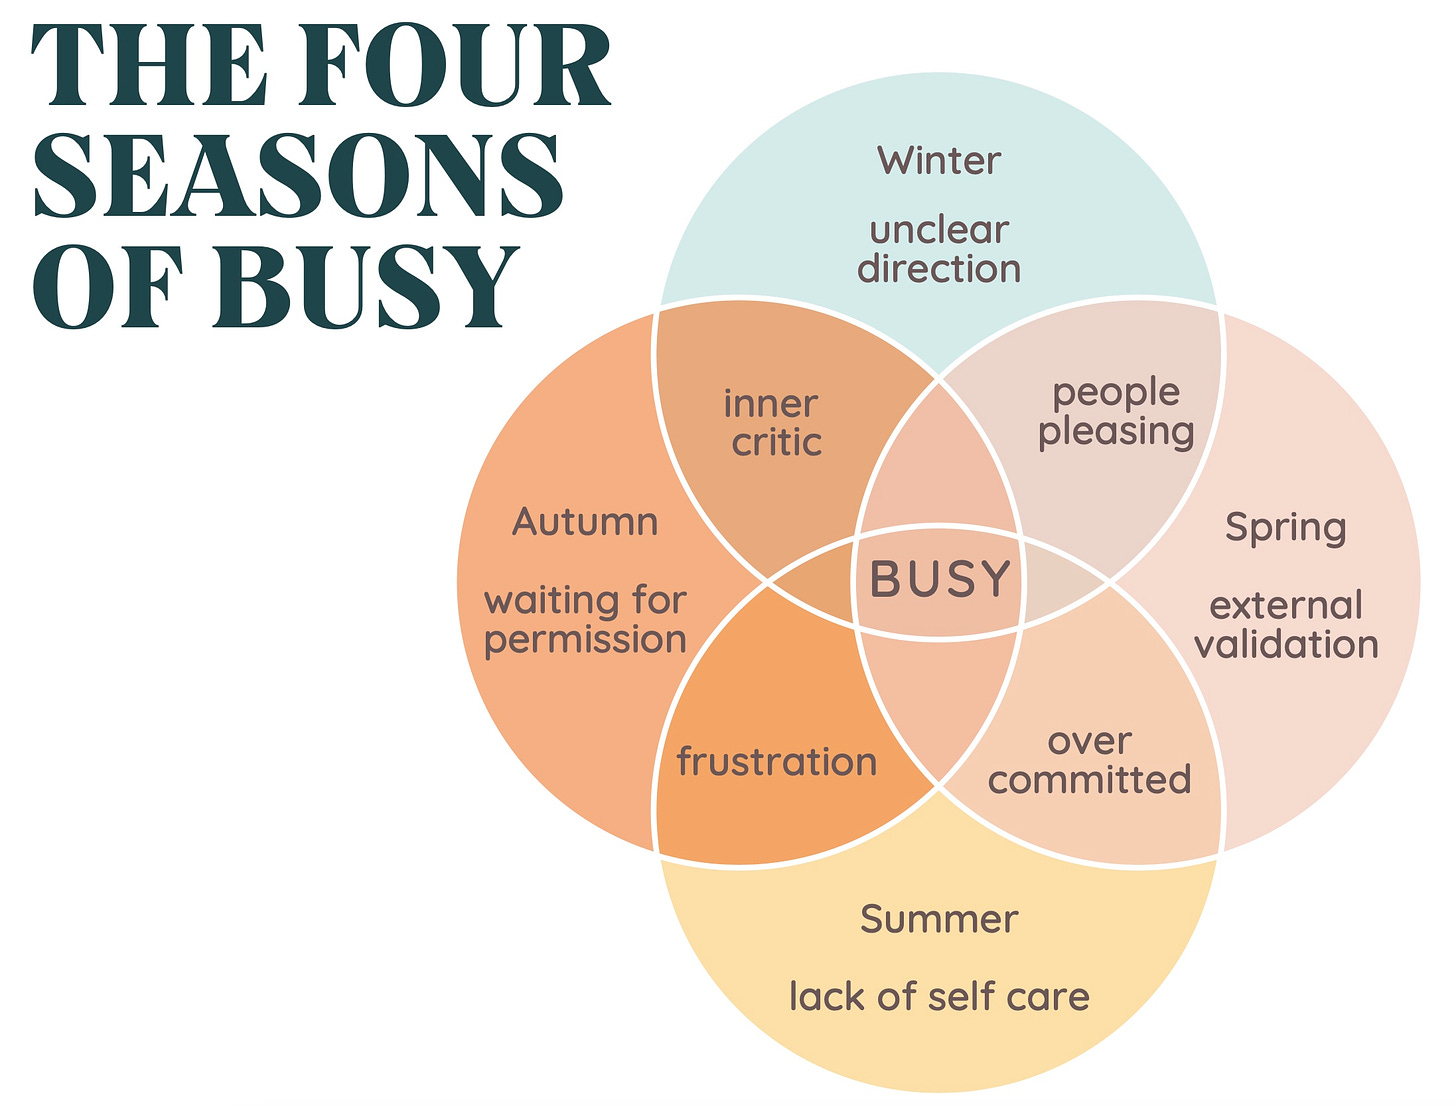 The four seasons of busy